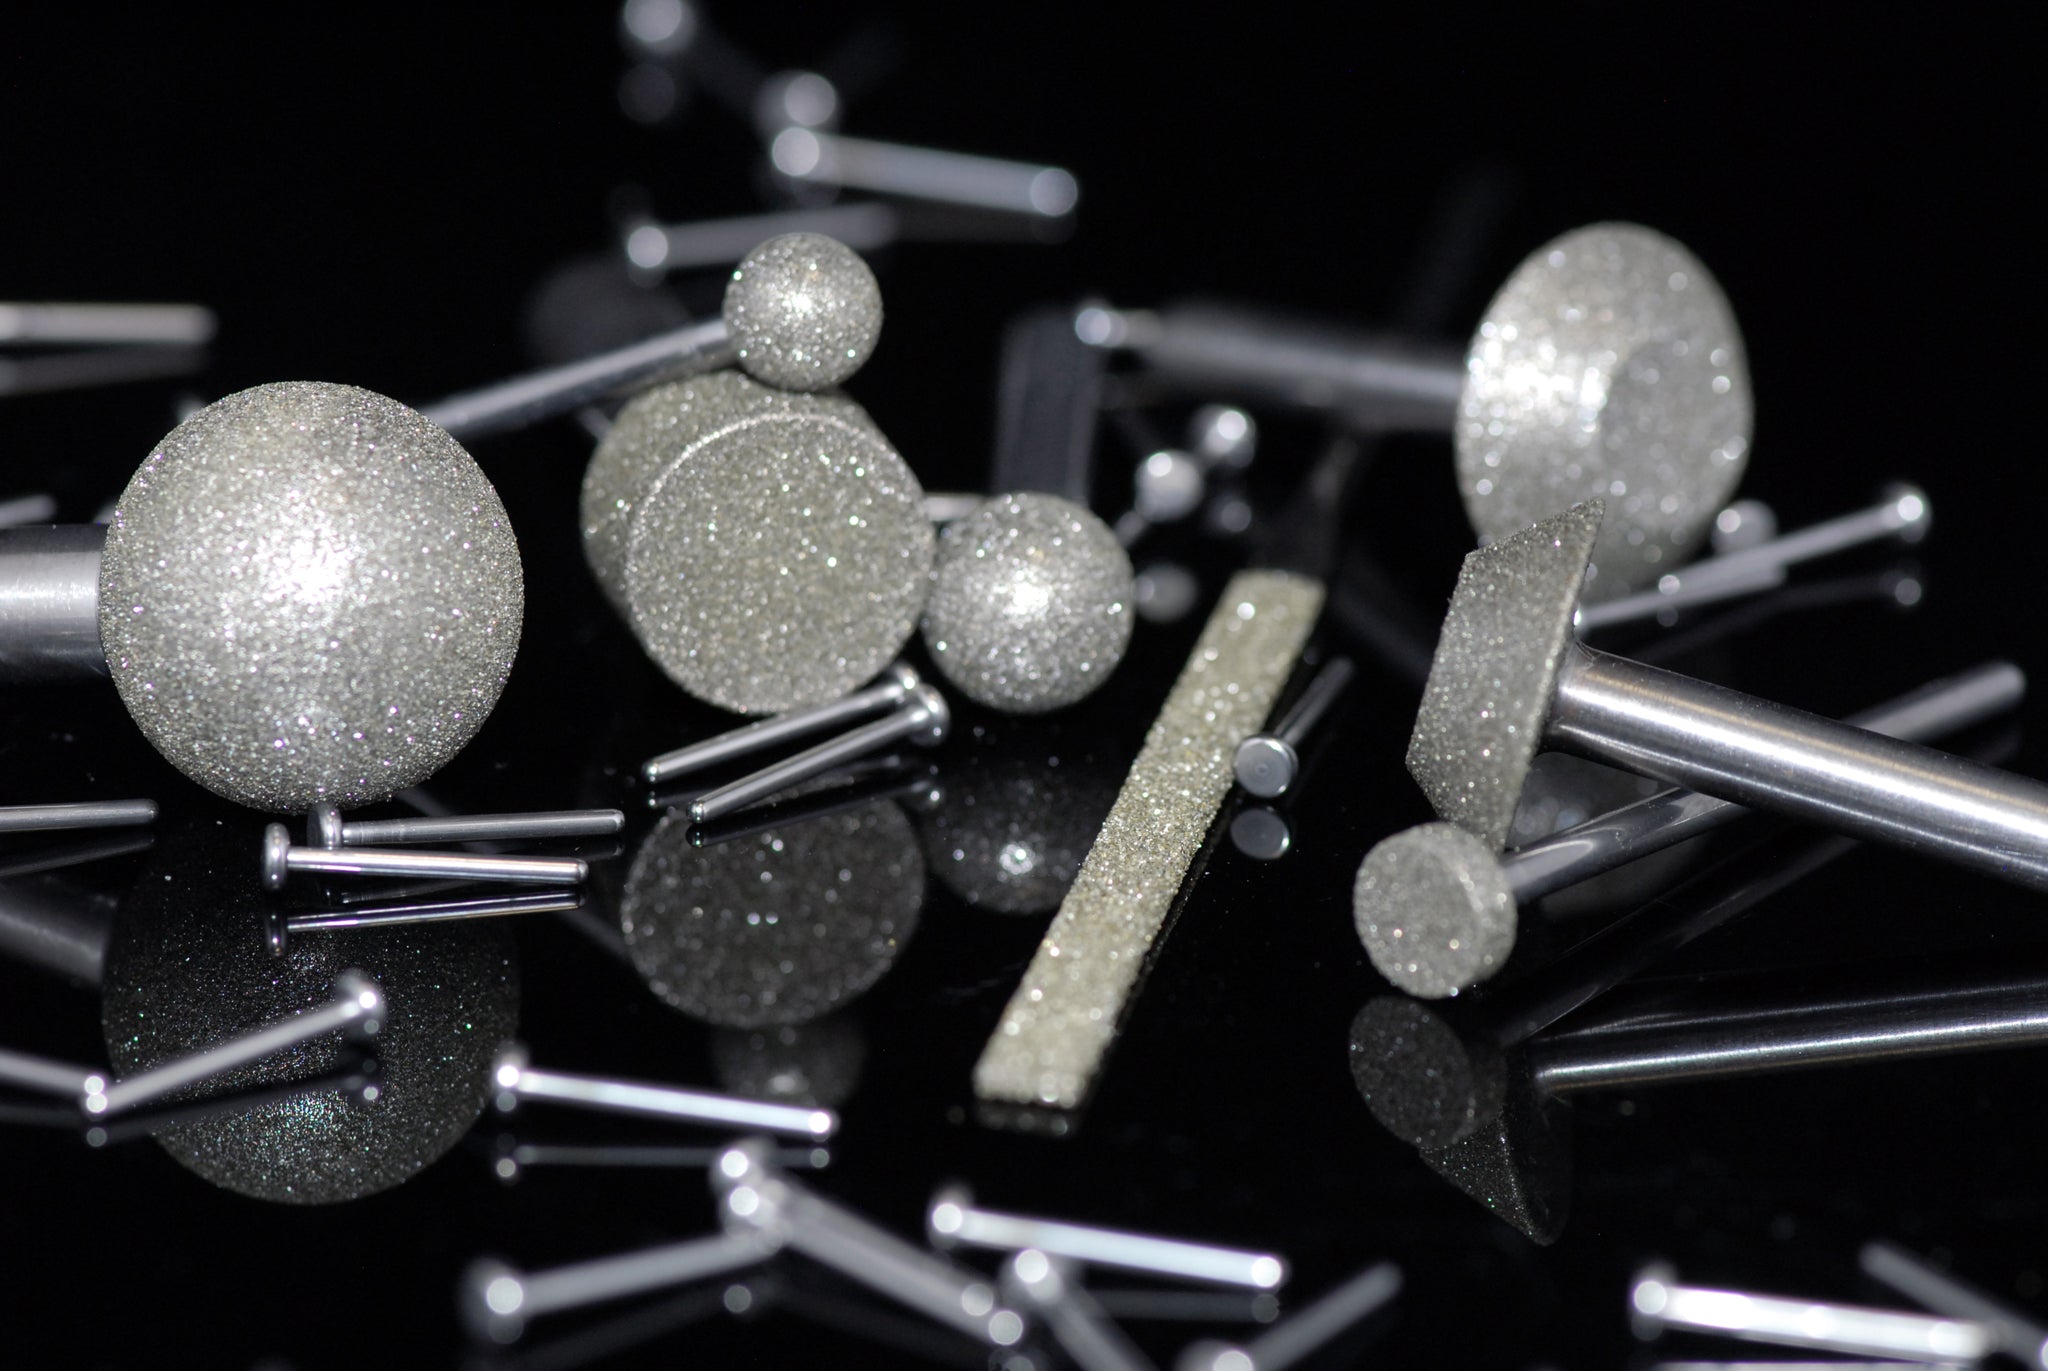 USA MADE DIAMOND TOOL MANUFACTURING COMPANY MAKING HIGH QUALITY PRODUCTS AT COMPETITIVE PRICING